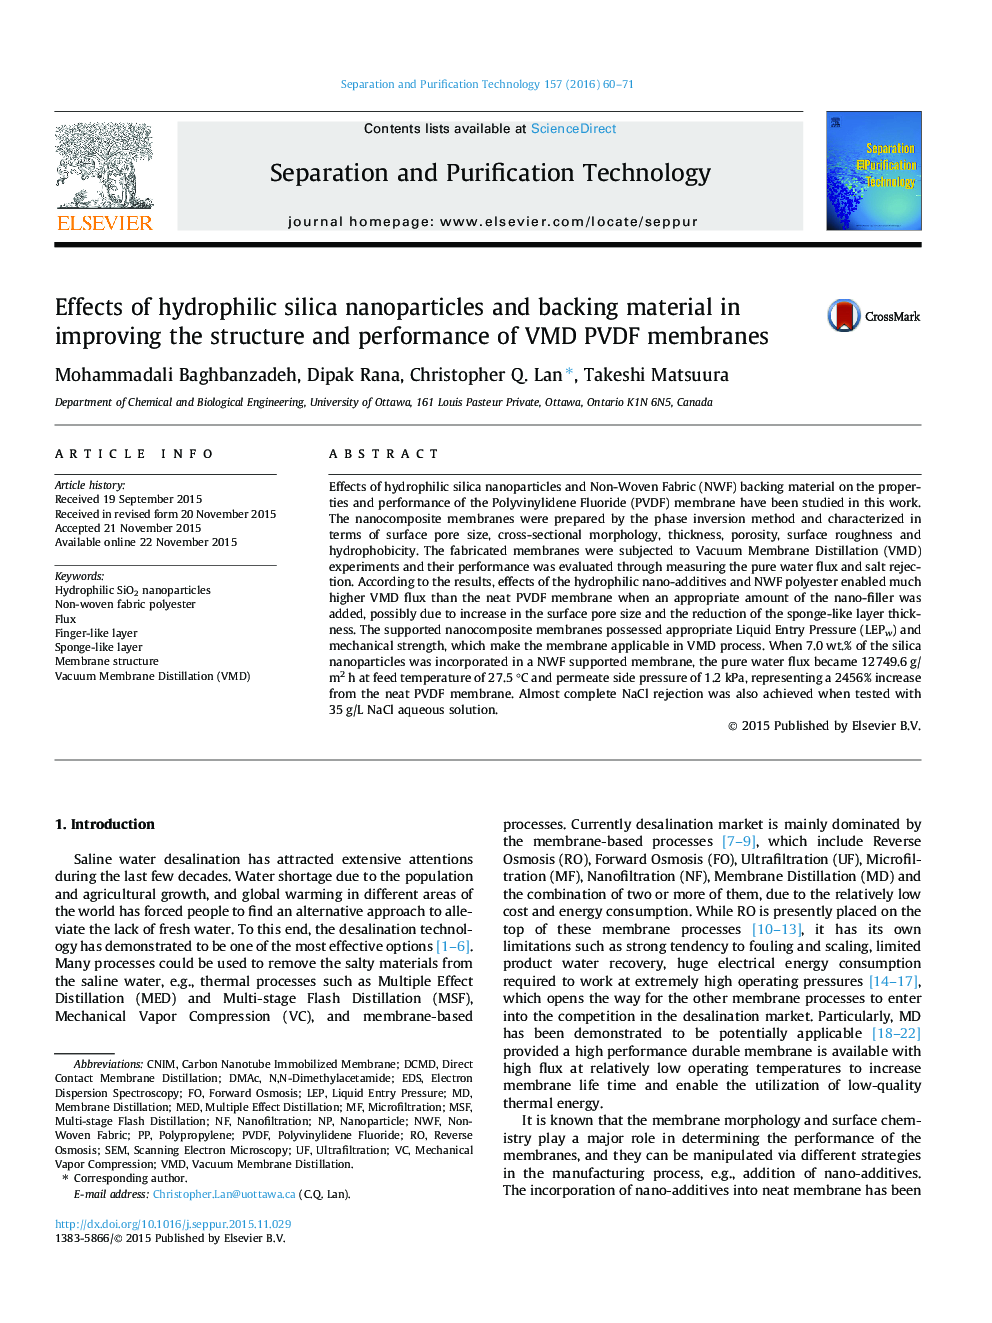 Effects of hydrophilic silica nanoparticles and backing material in improving the structure and performance of VMD PVDF membranes